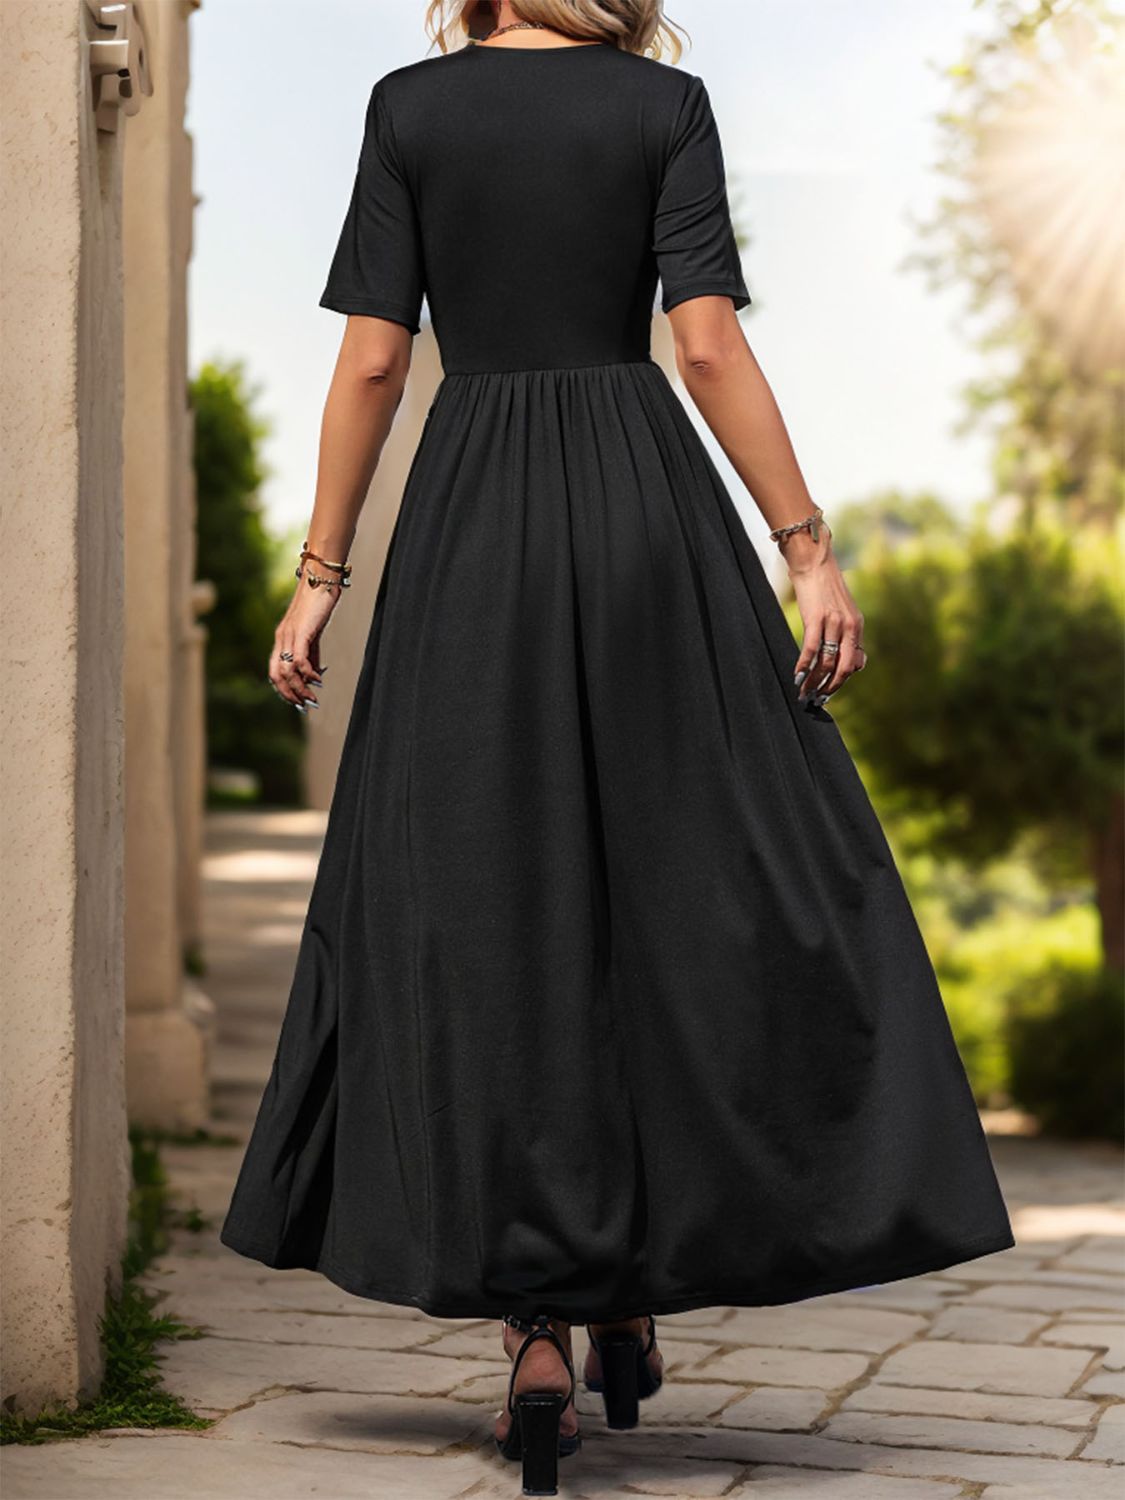 Long Black Maxi Dress with Sleeves | V Neck with Lace Detail Dress | Long Black Dress with Side Slit